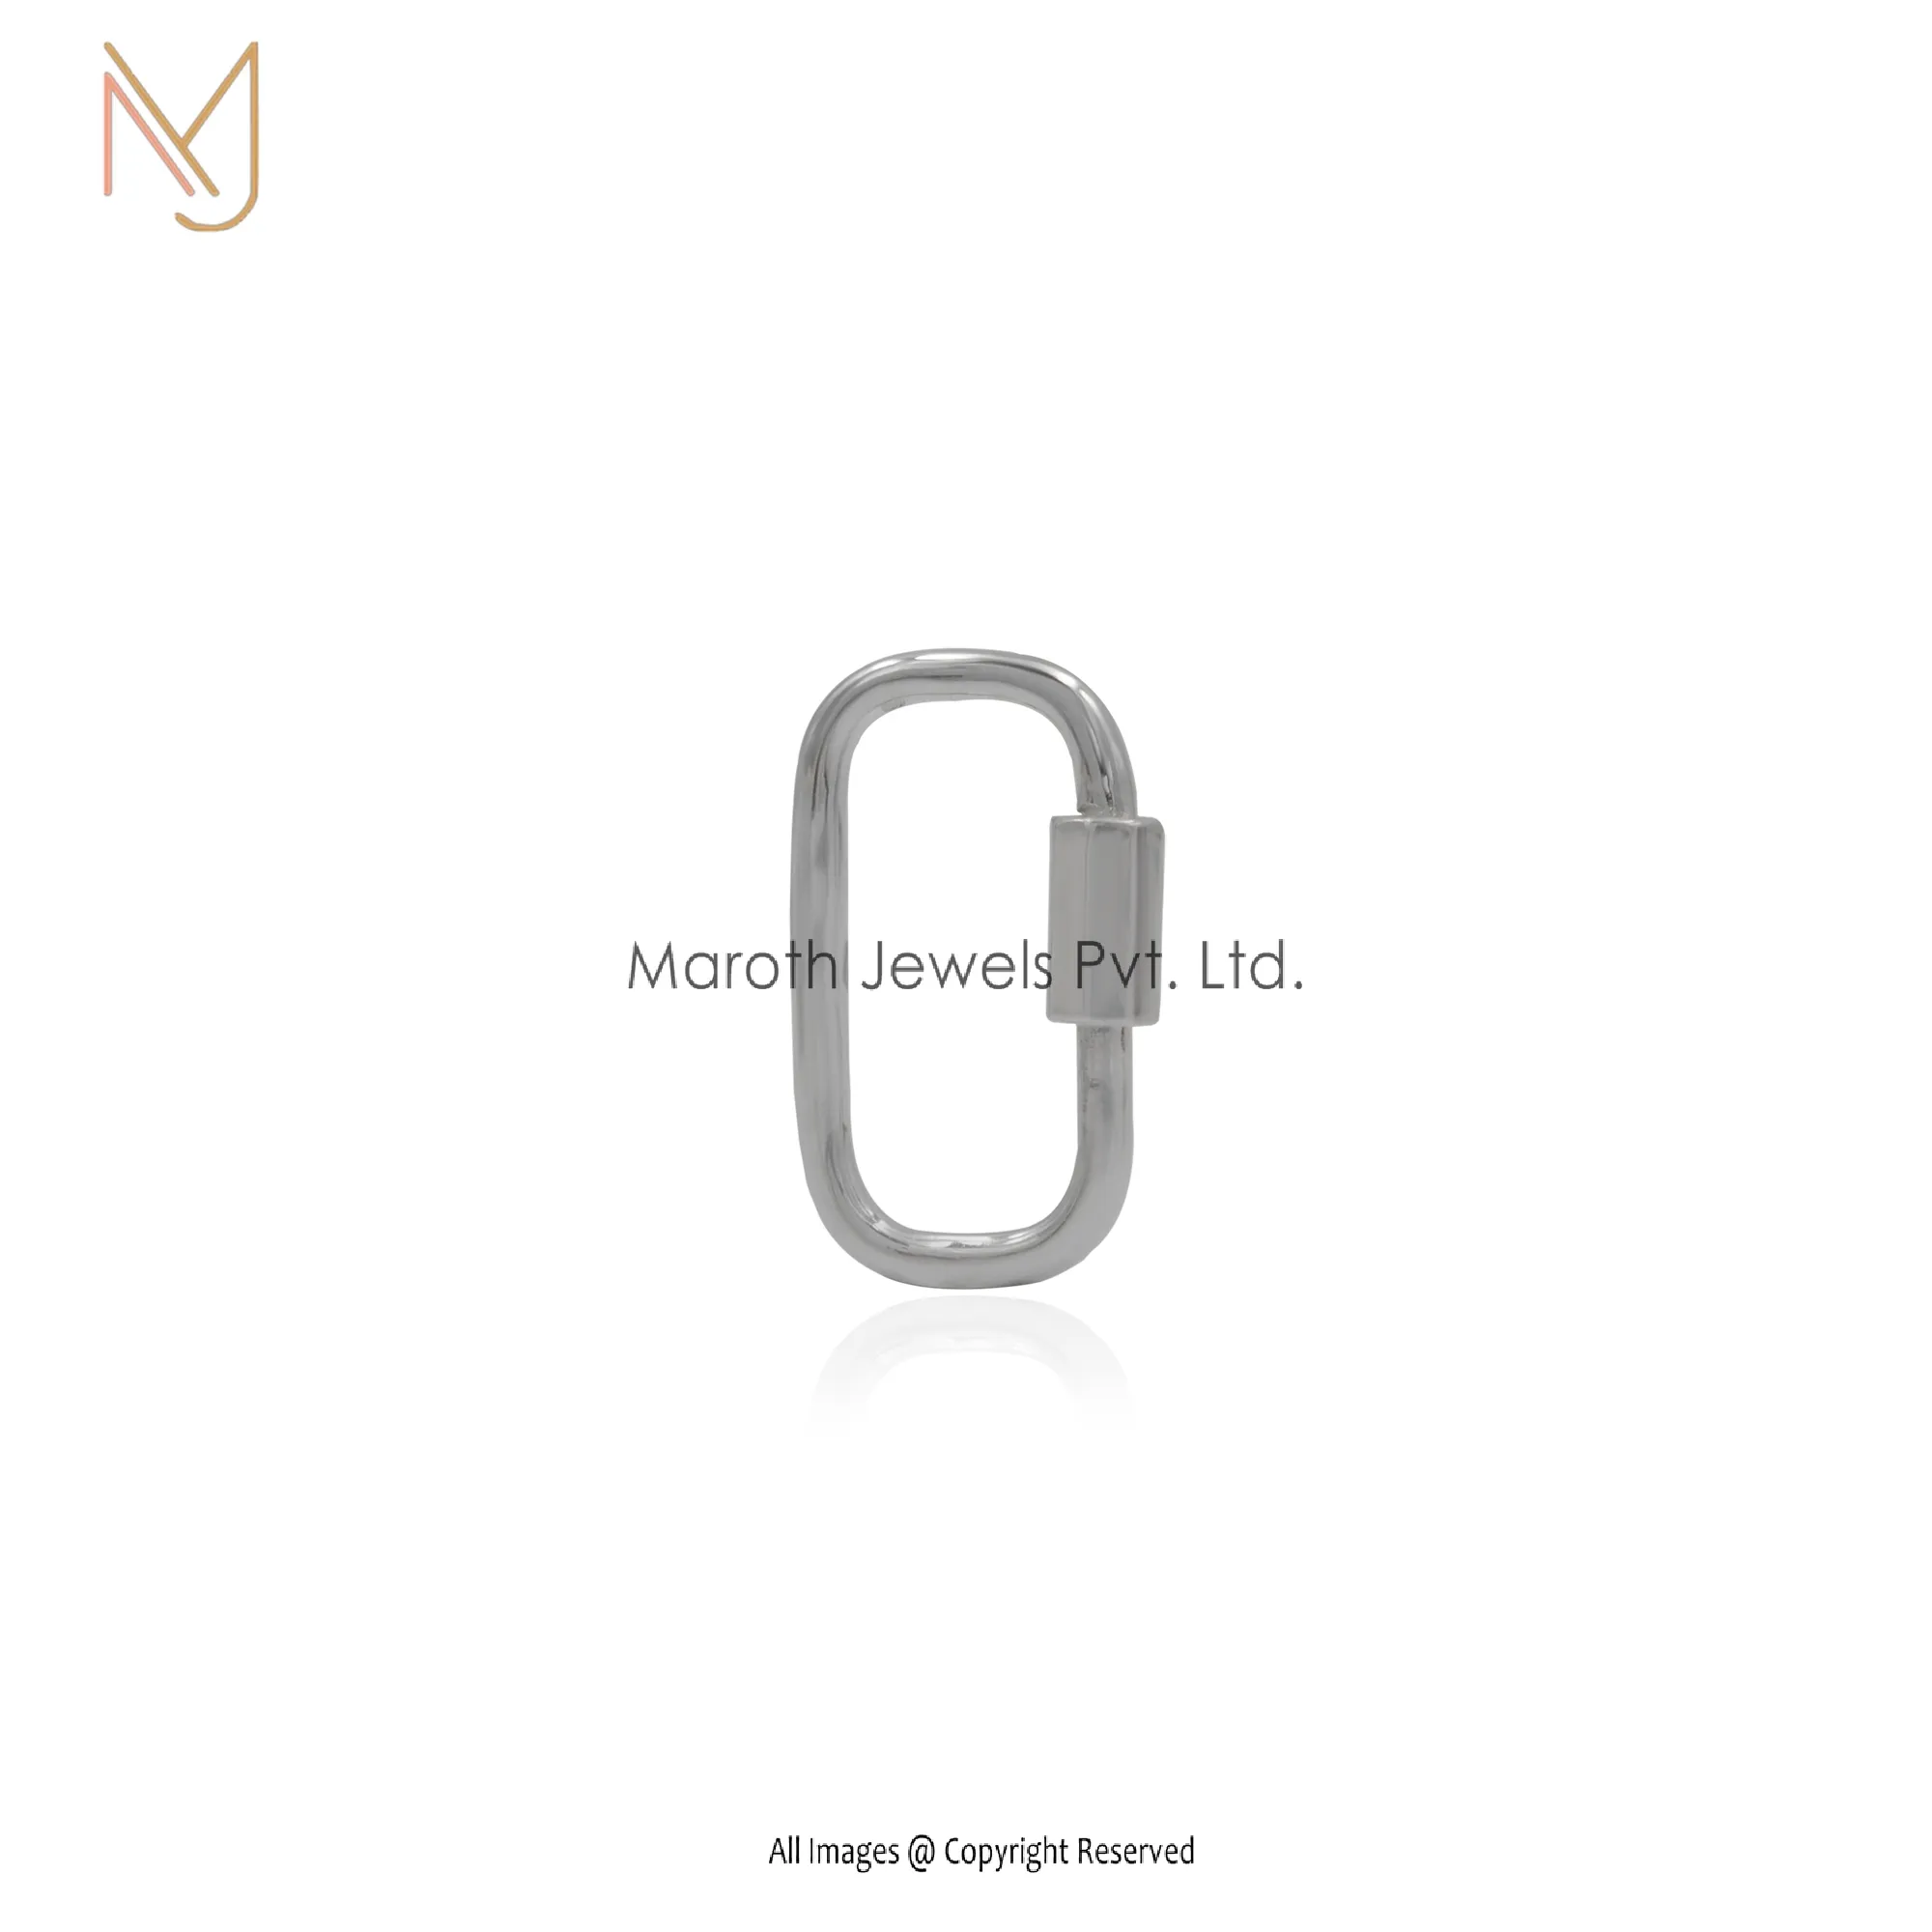 Wholesale 925 Silver Yellow Gold Overlay Square Plain Carabiner Lock Findings Jewelry